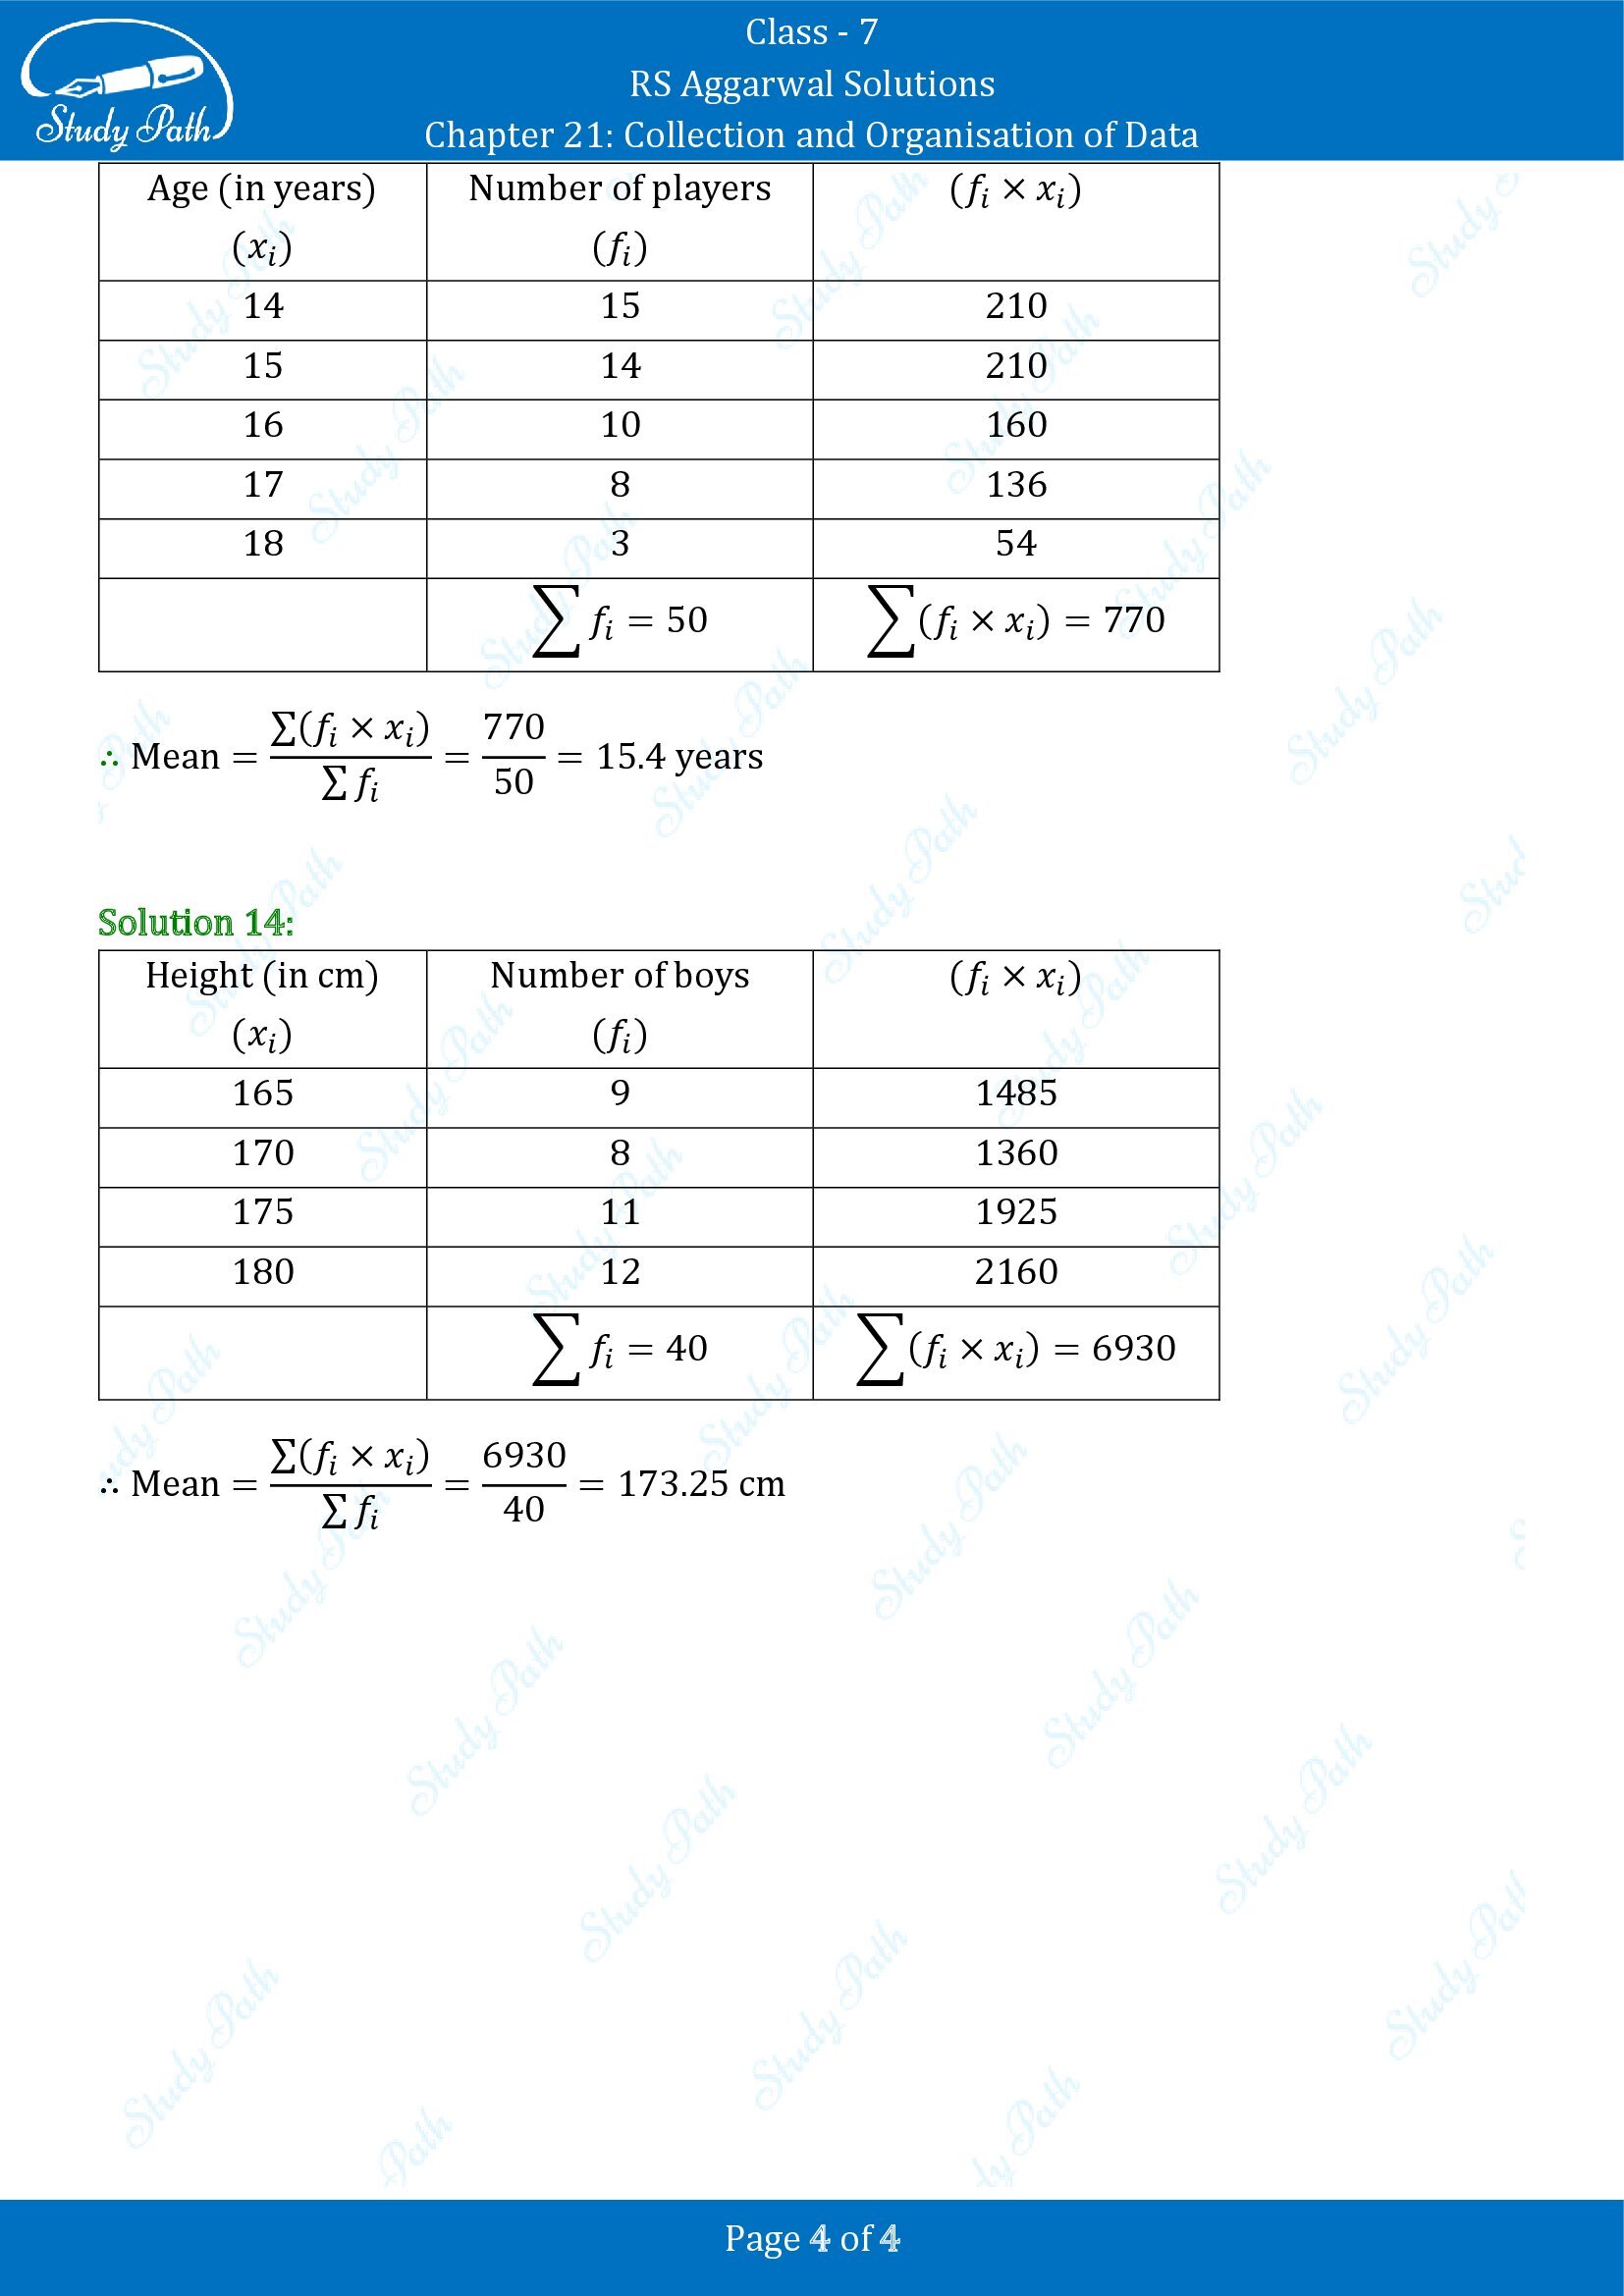 RS Aggarwal Solutions Class 7 Chapter 21 Collection and Organisation of Data Exercise 21A 0004